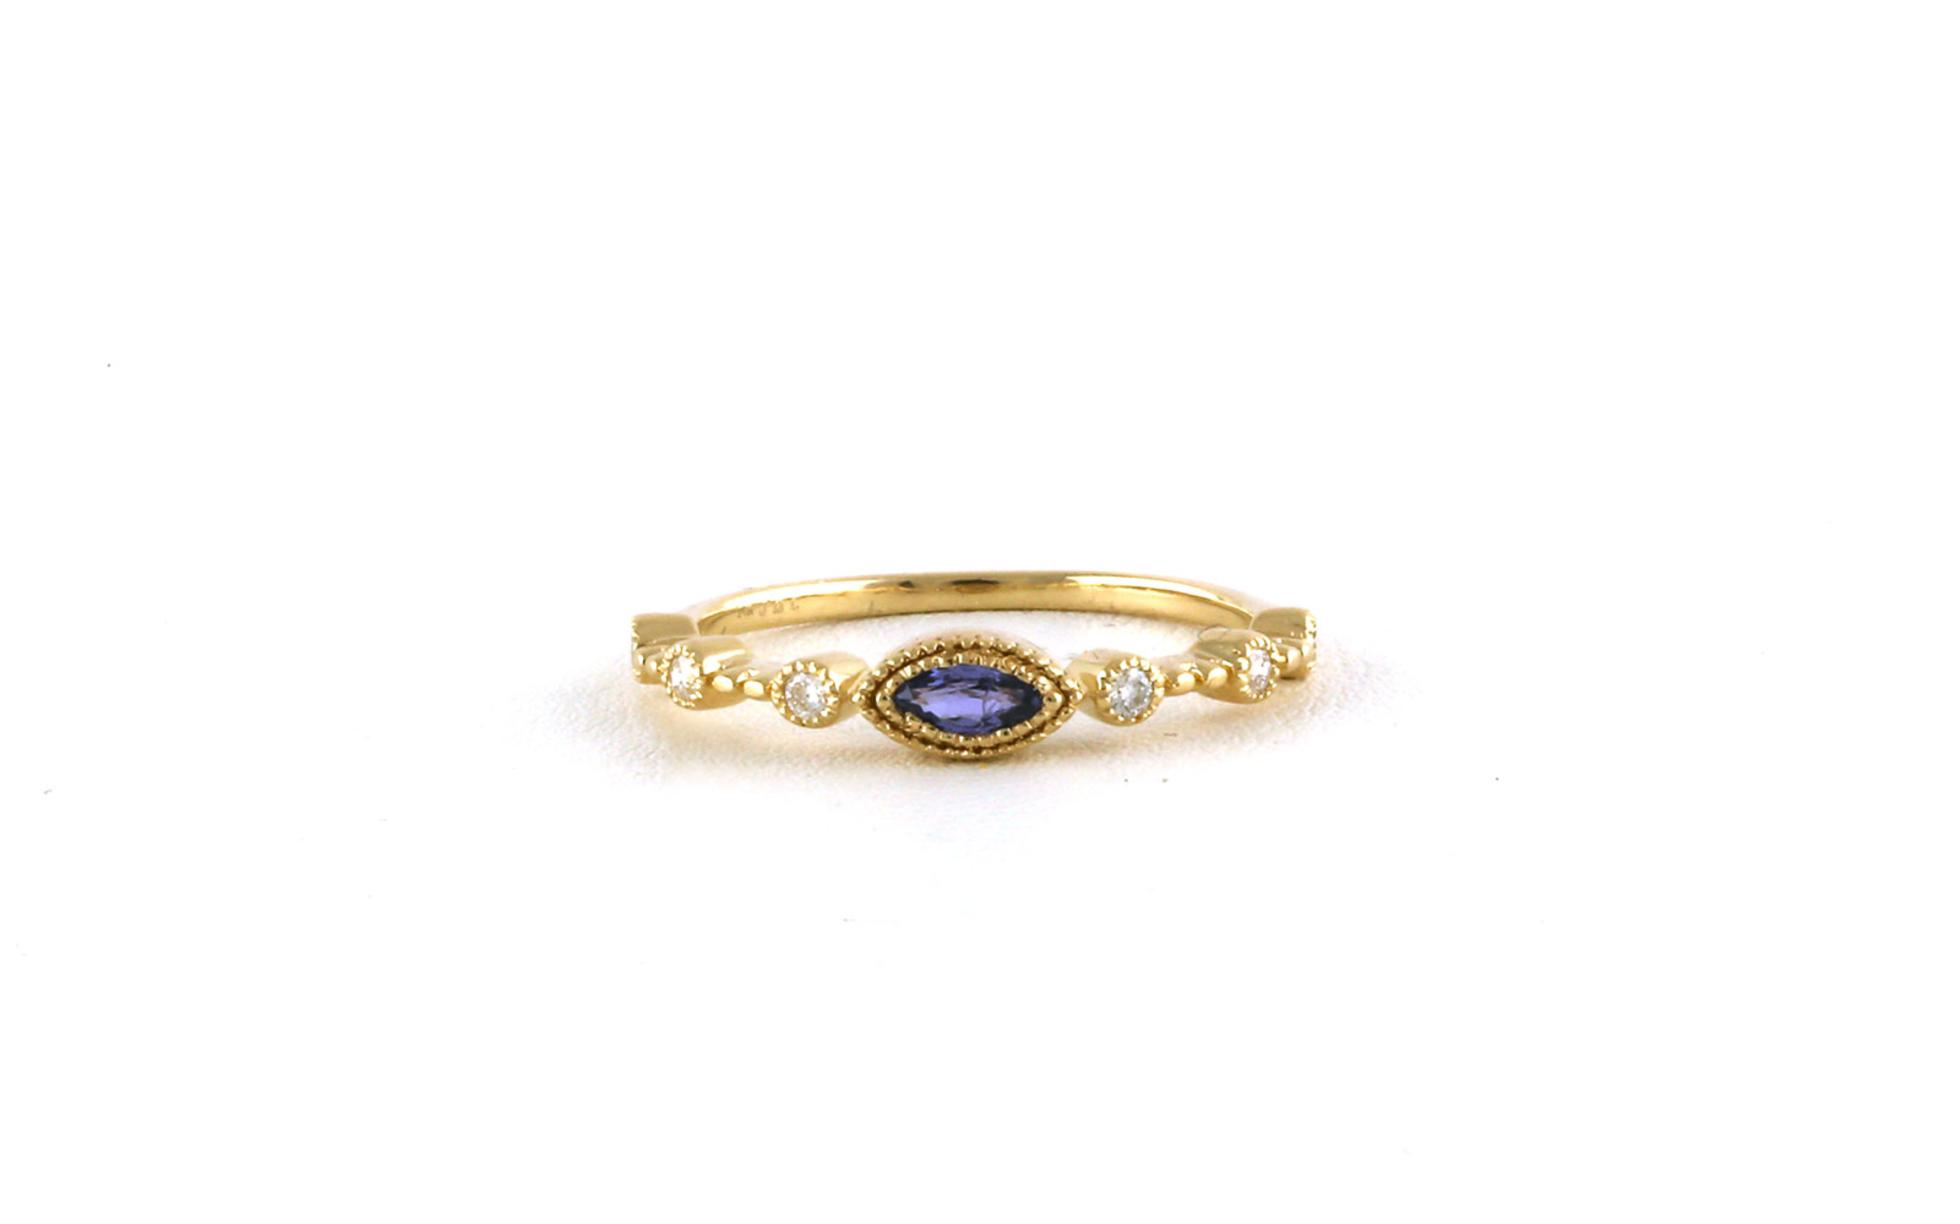 Vintage-style Bezel-set Marquise-cut Montana Yogo Sapphire and Diamond Ring with Milgrain Detail in Yellow Gold (0.28cts)